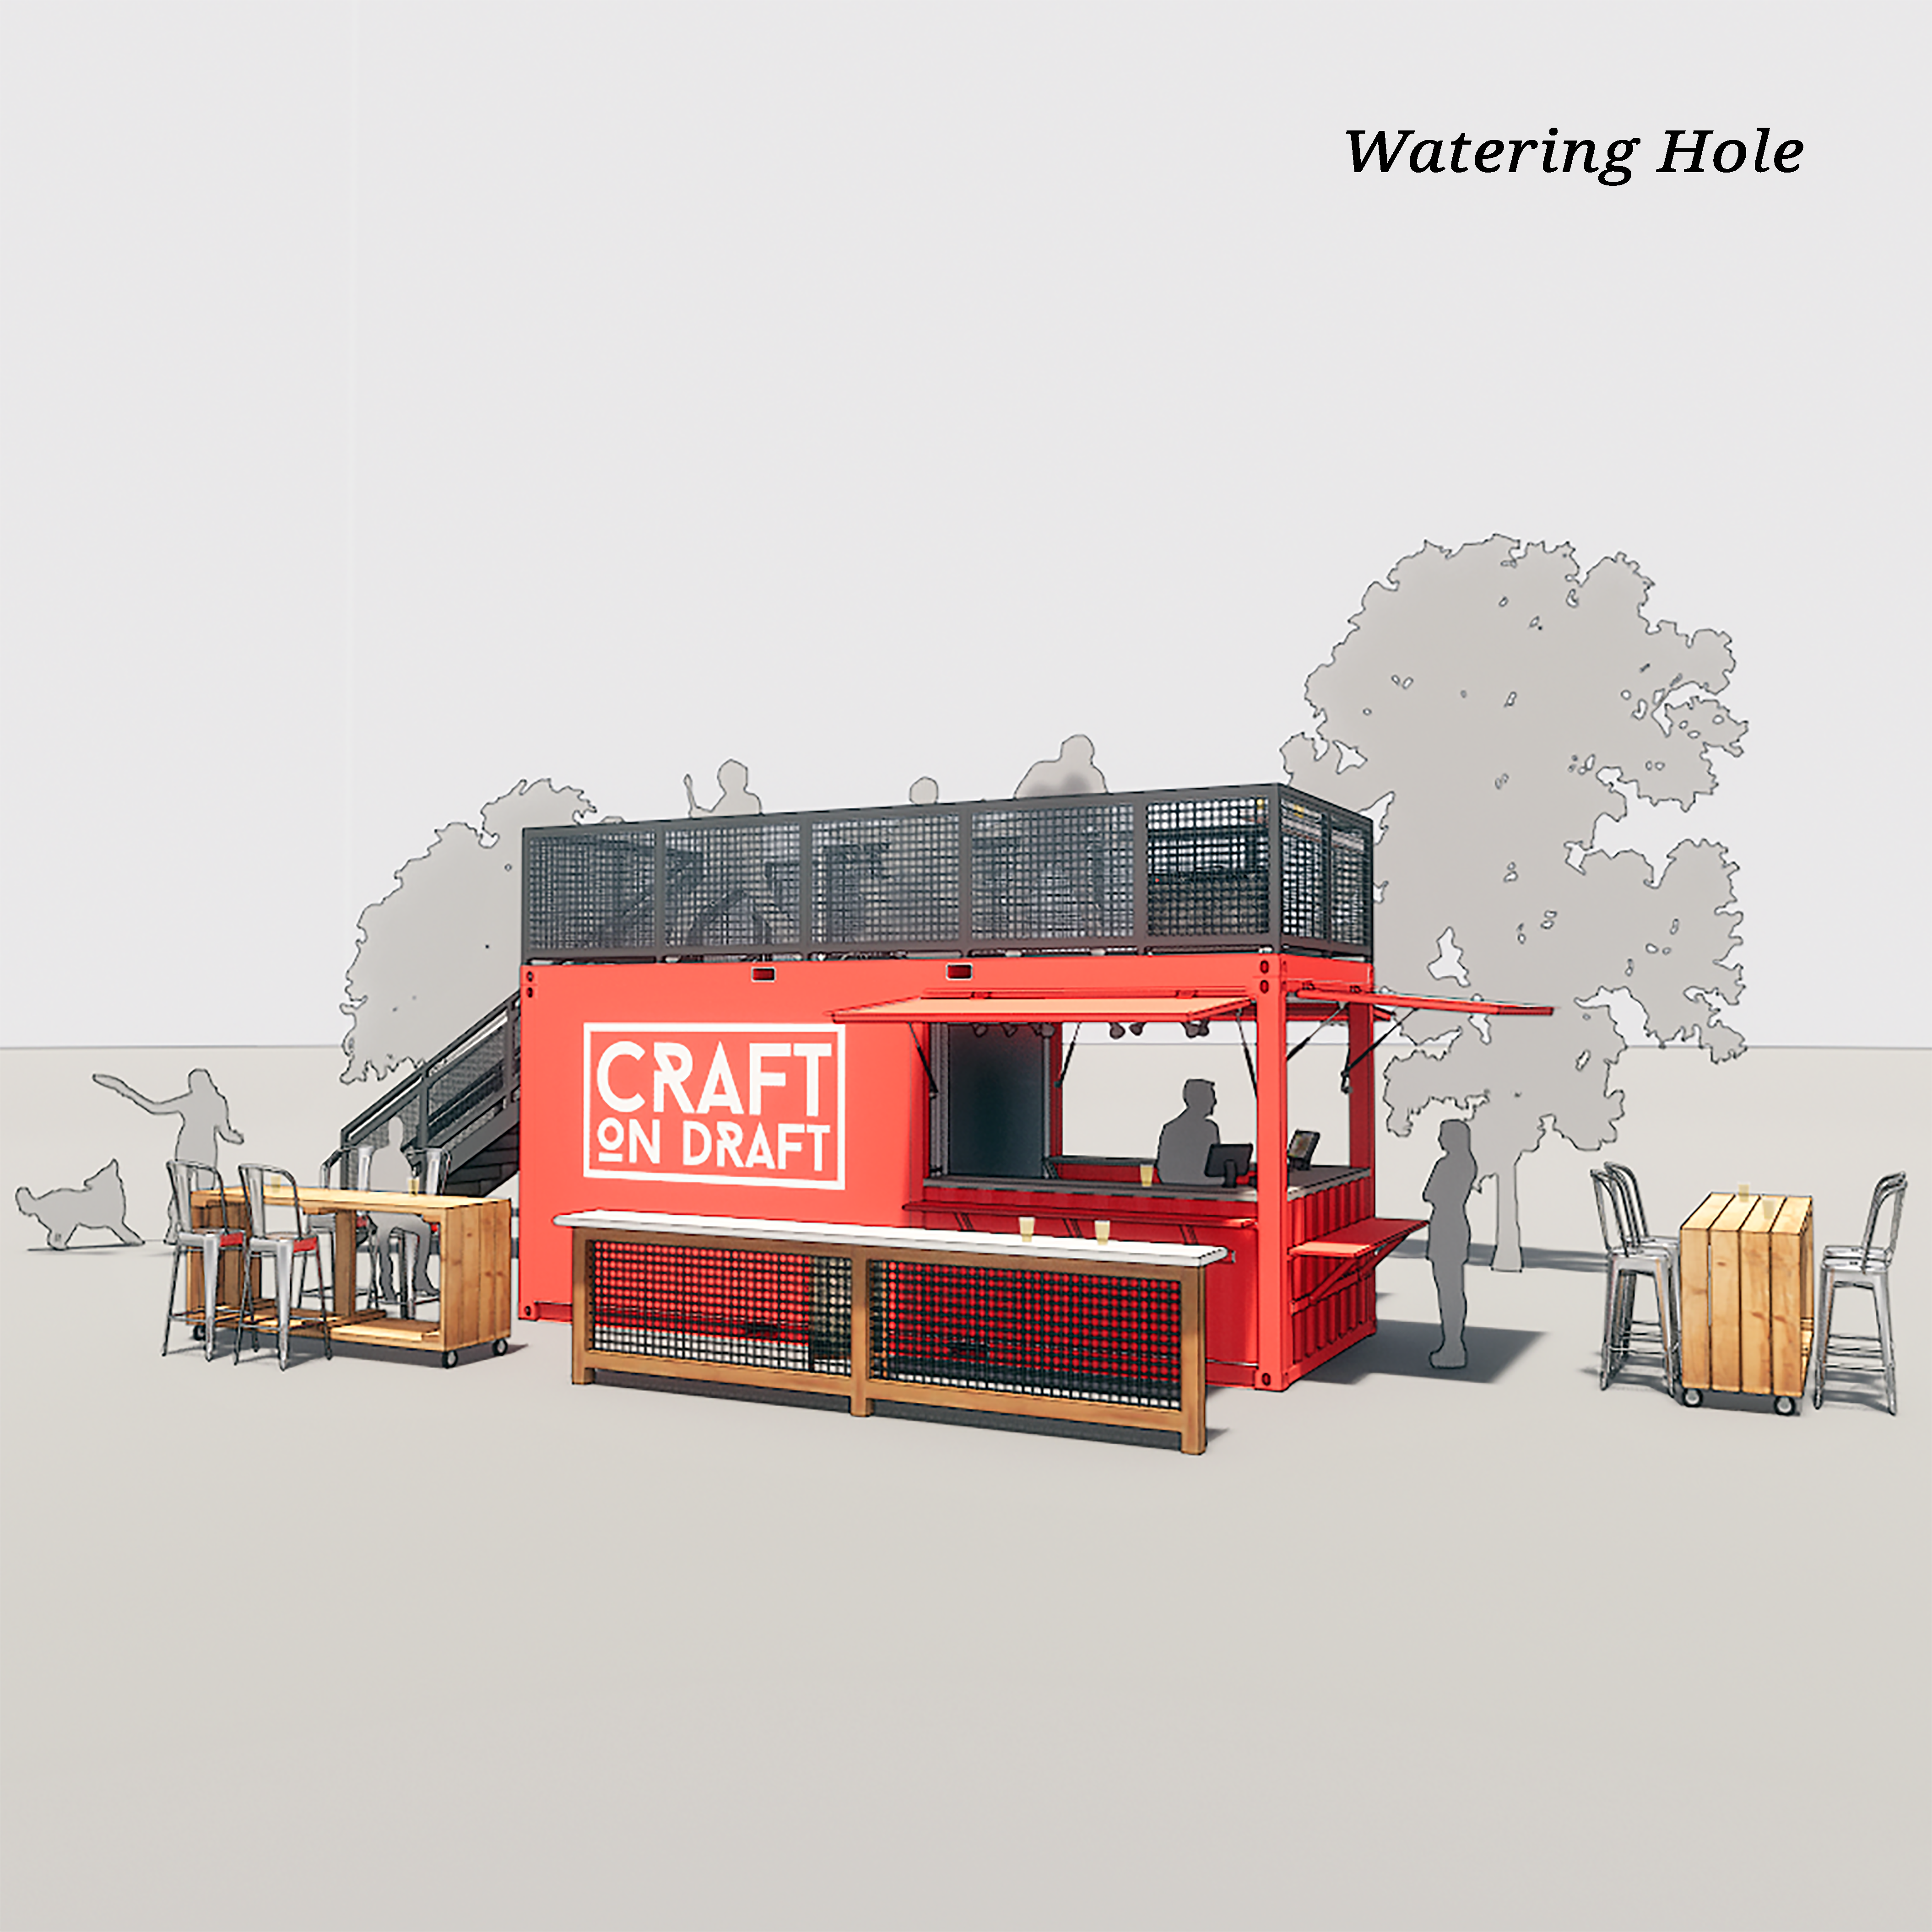 New-Watering-Hole-r0.png